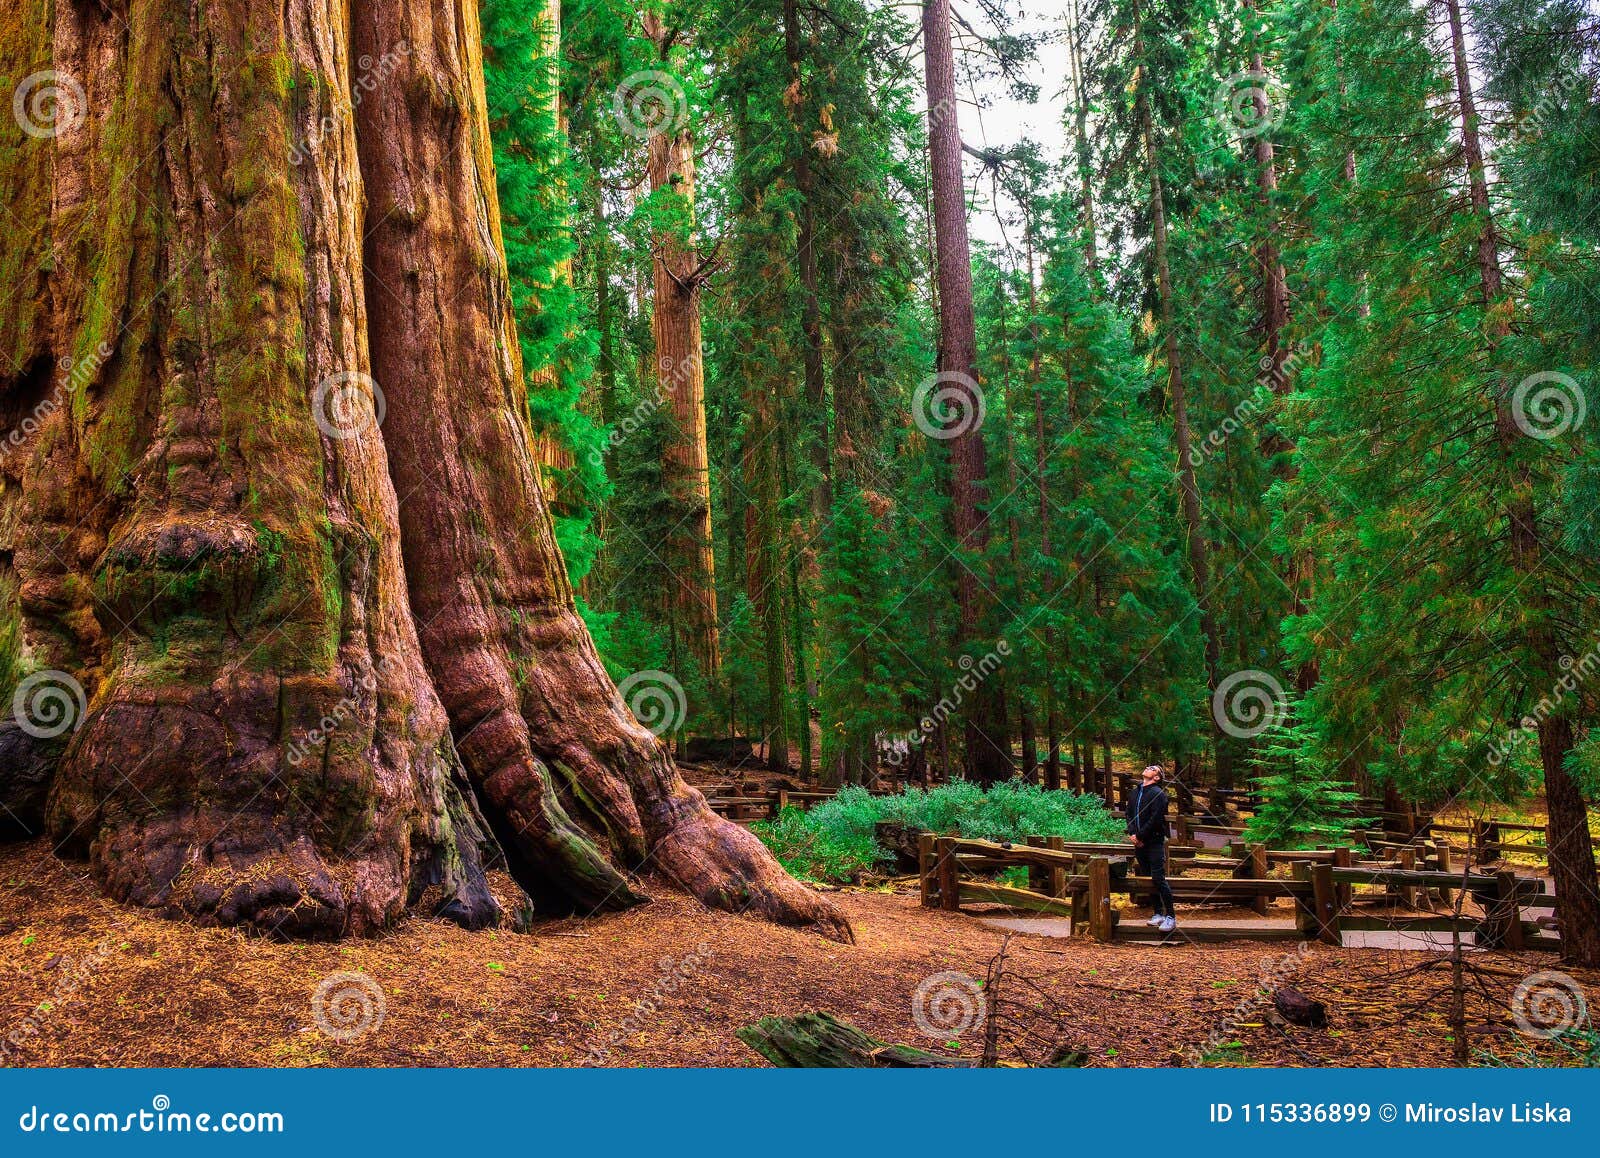 tourist looks up at a giant sequoia tree